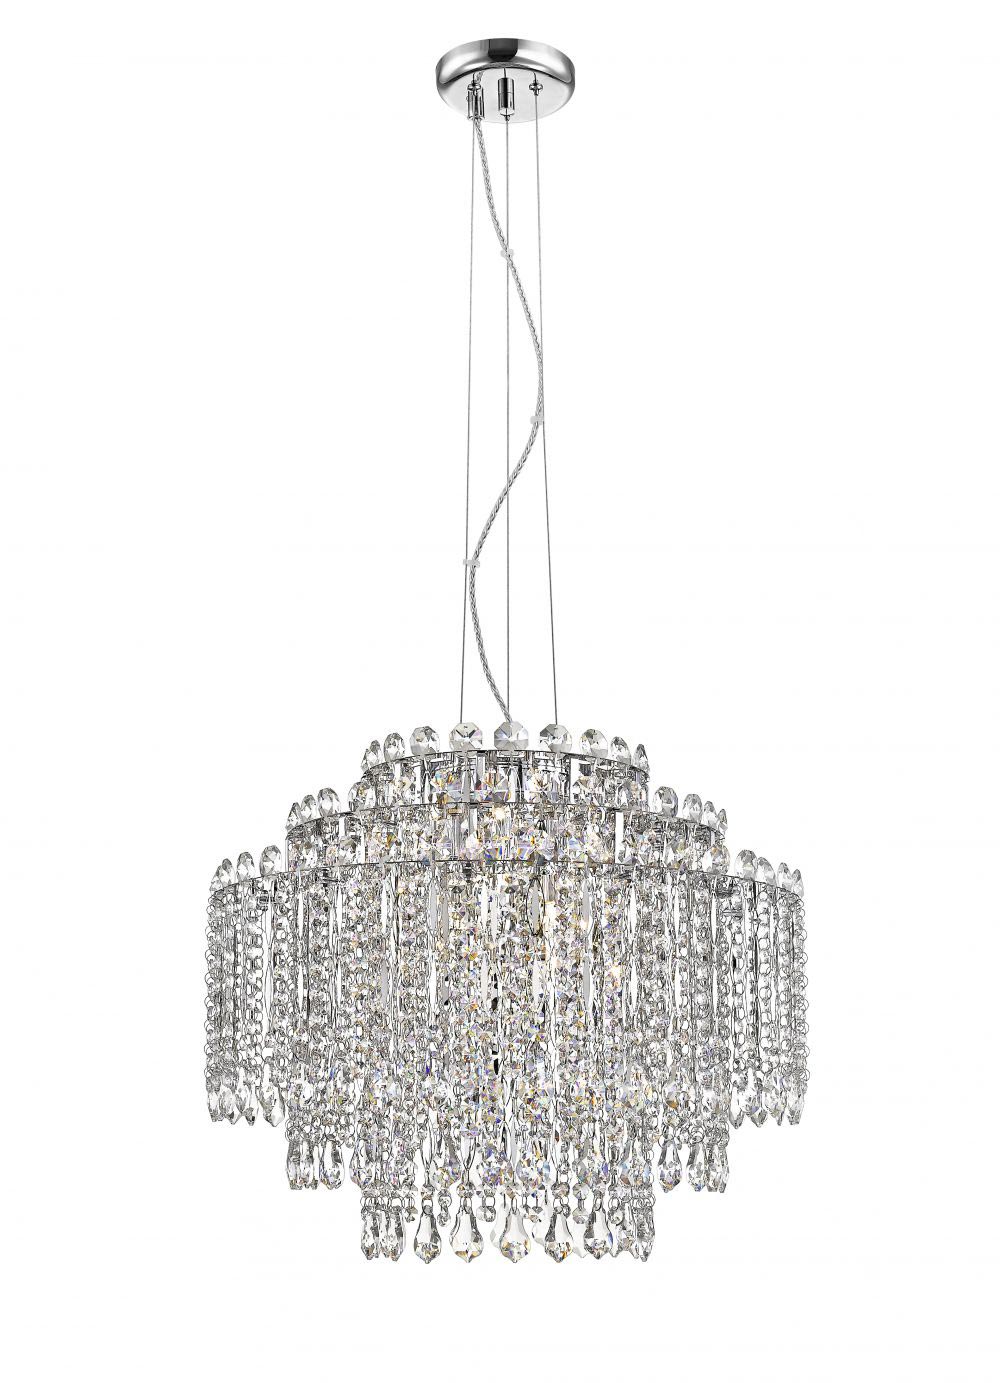 Impex Alita Crystal 8 Light Tiered Ceiling Pendant Polished Chrome